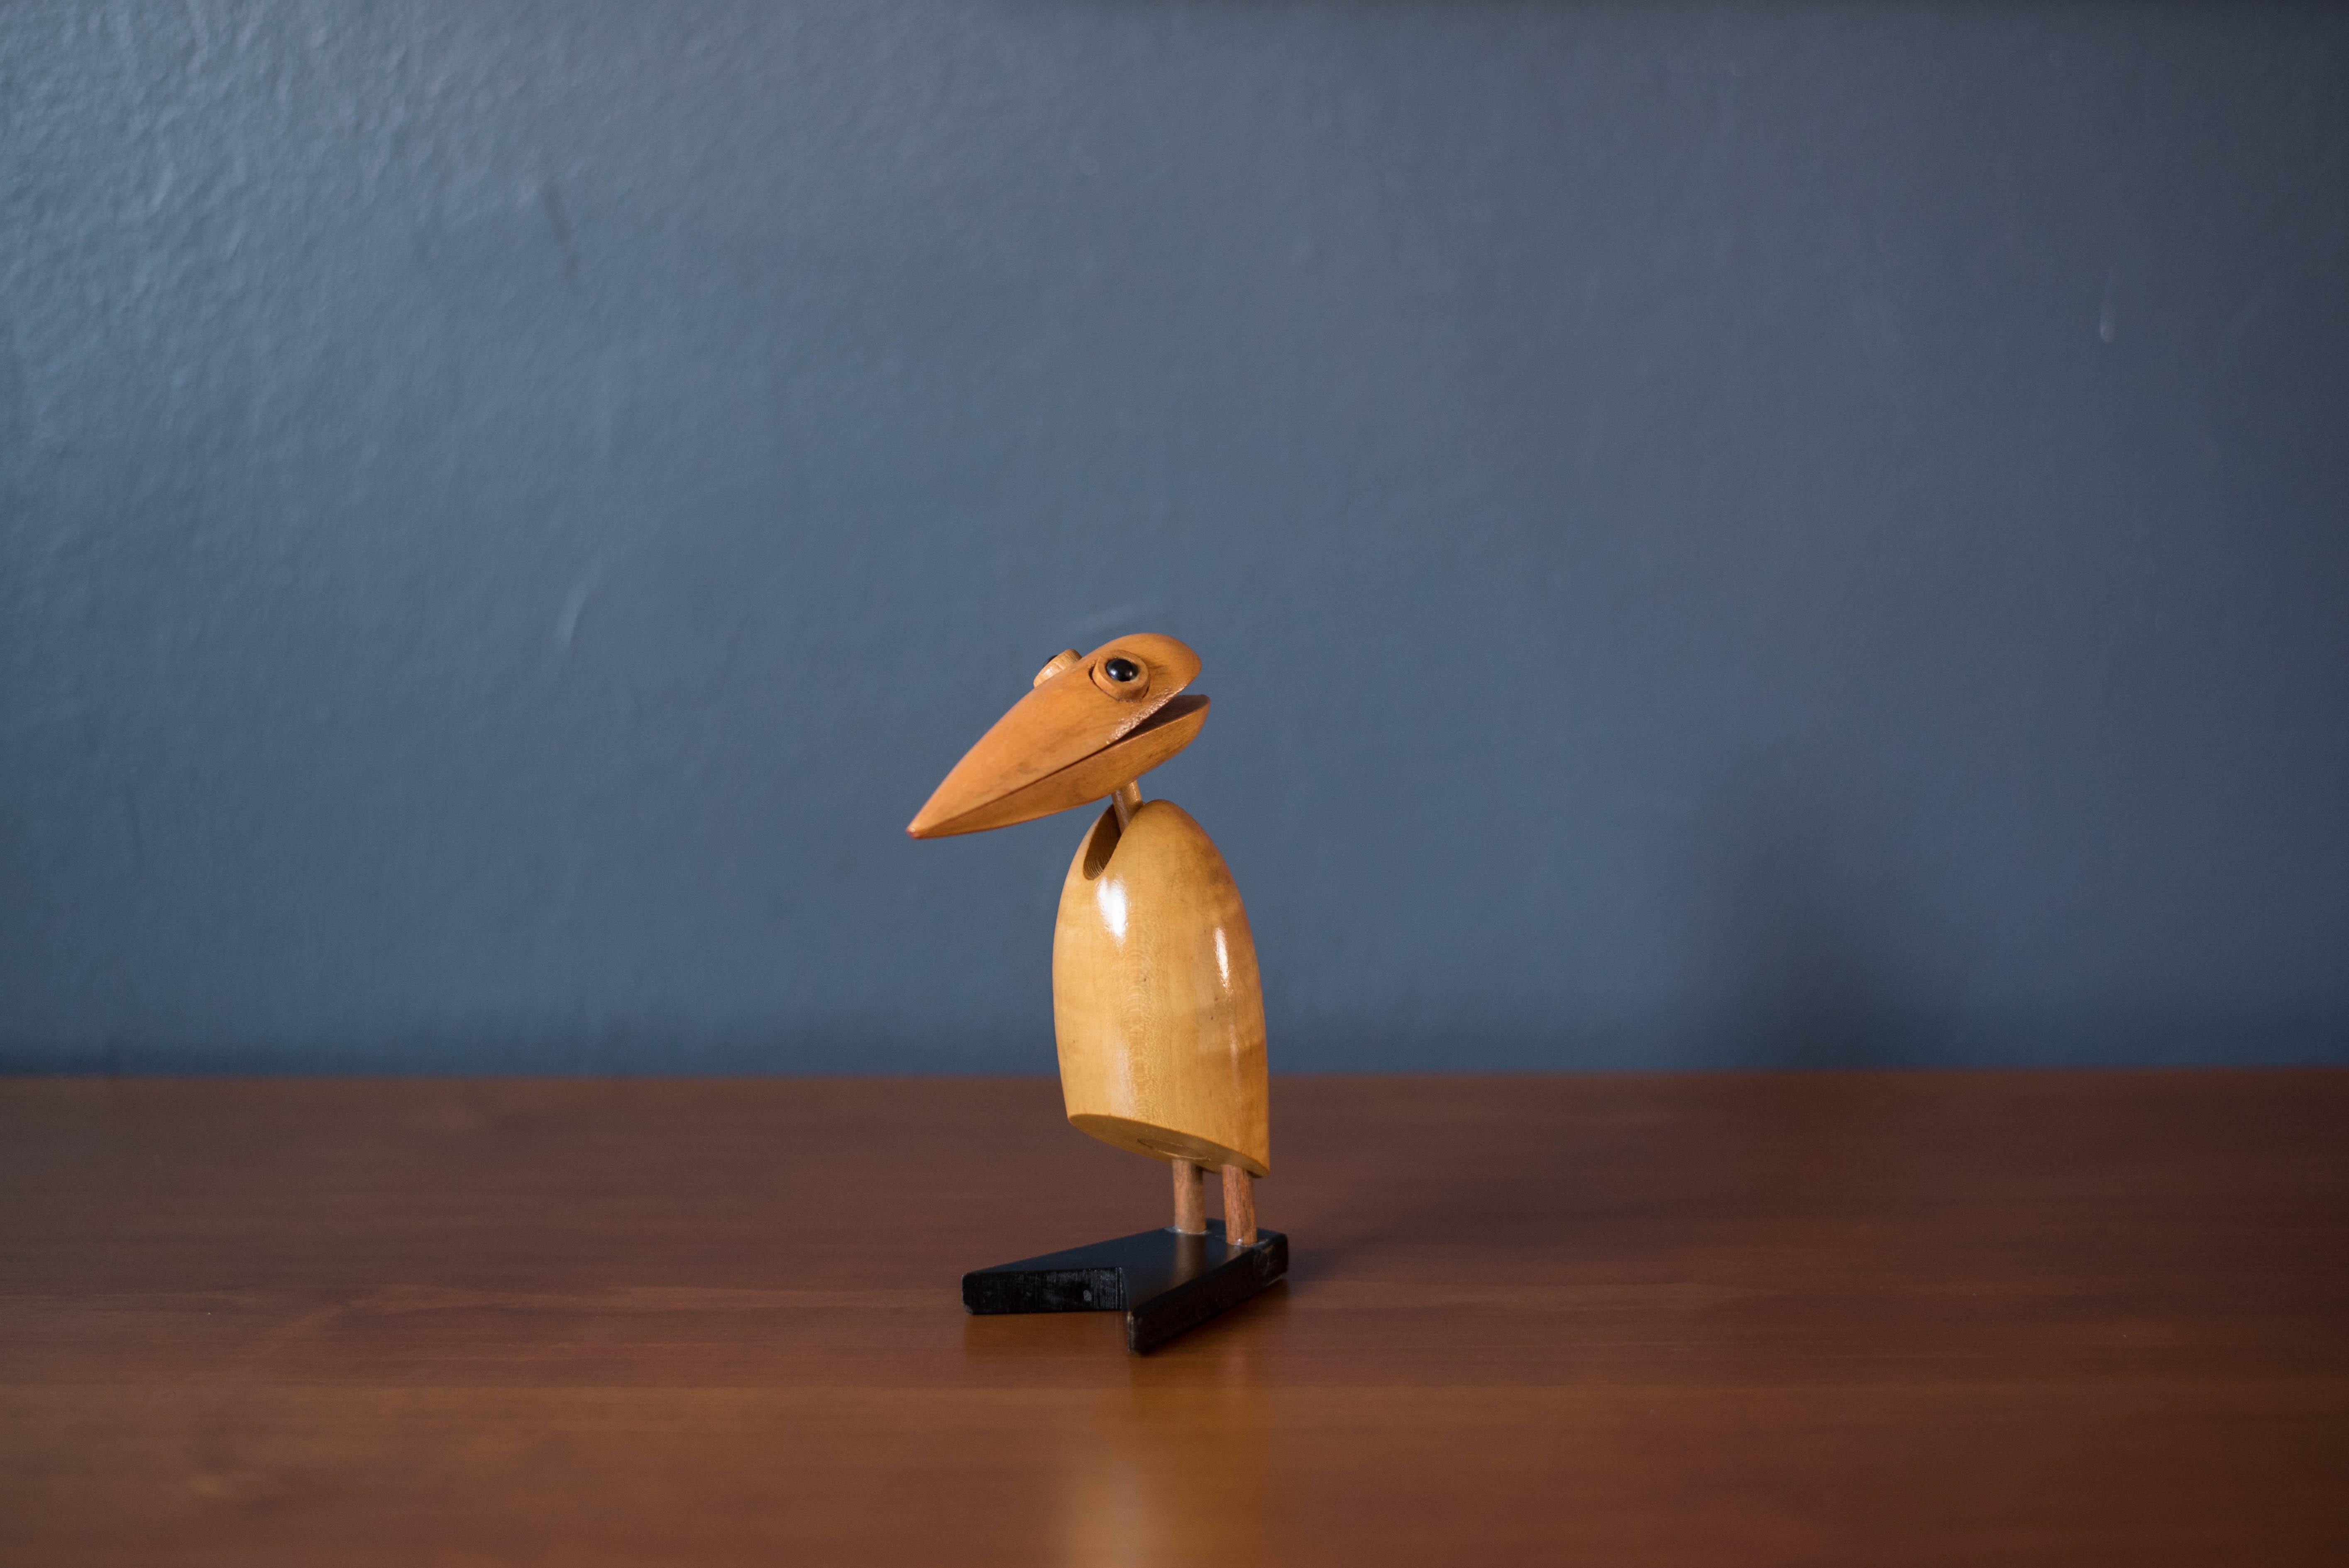 Mid-Century Modern desktop wooden dodo bird animal sculpture made in Japan, imported by Takahashi, San Francisco circa 1960's. This clever piece functions as a paper note or business card holder. A fun accessory to display in the home of office.